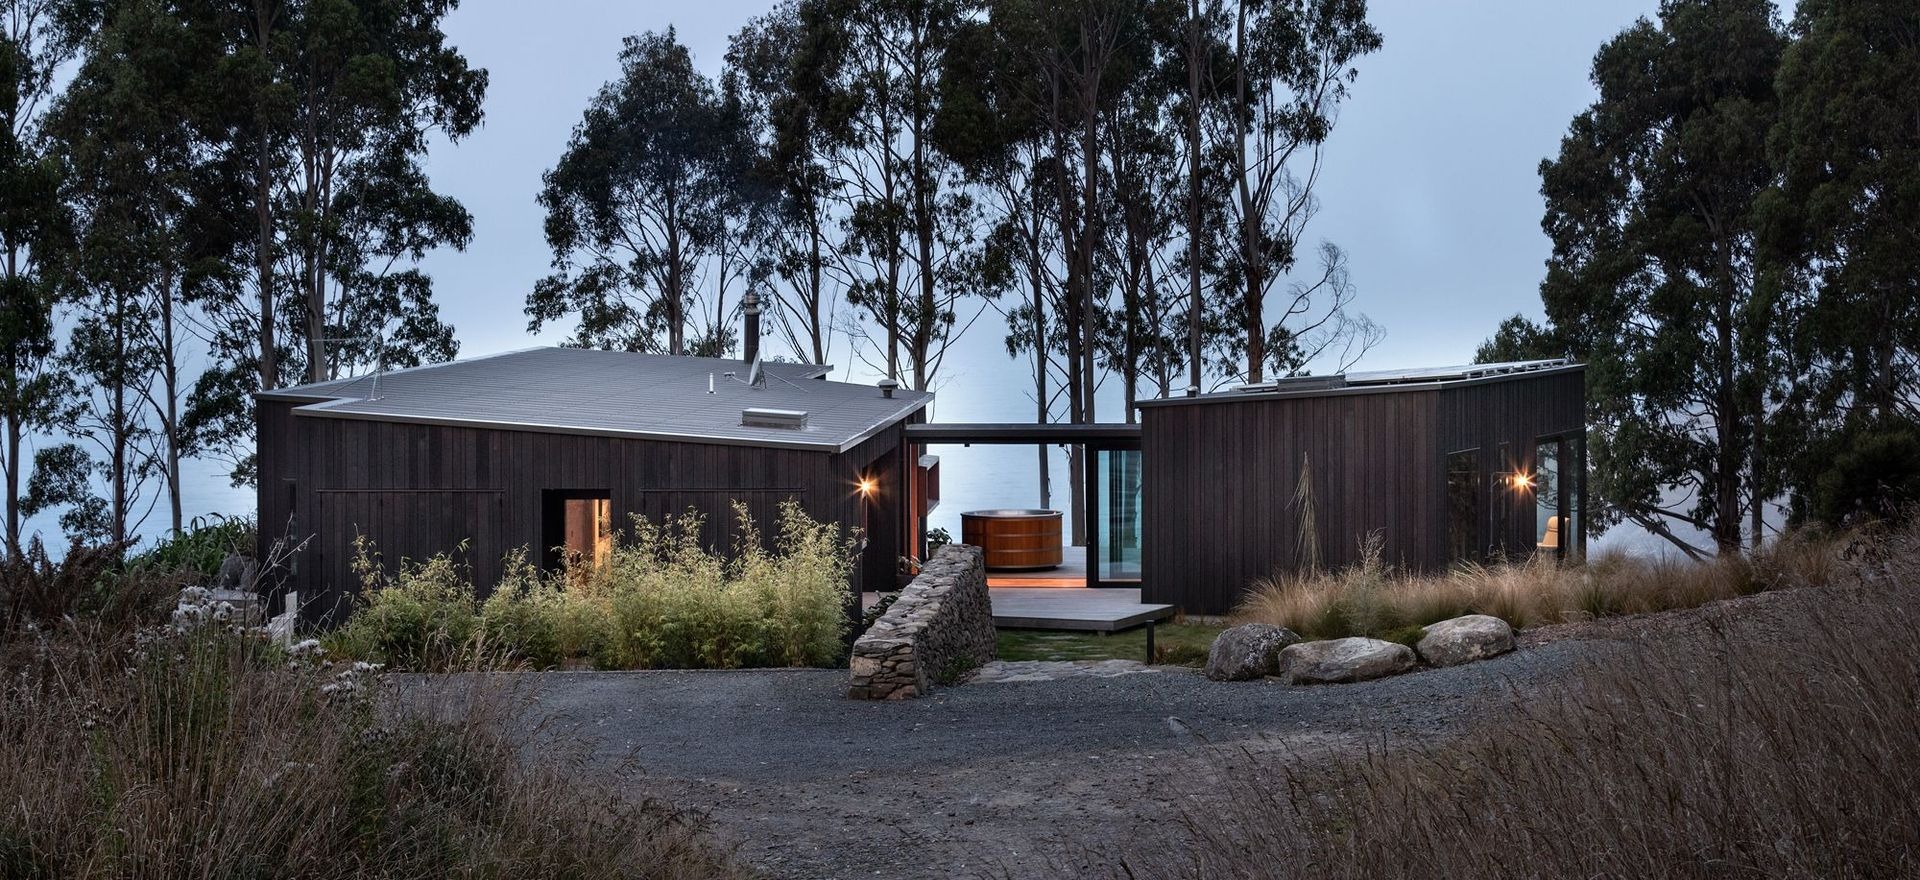 A remote cliff top dwelling designed to indulge in every inch of its rugged coastal locale